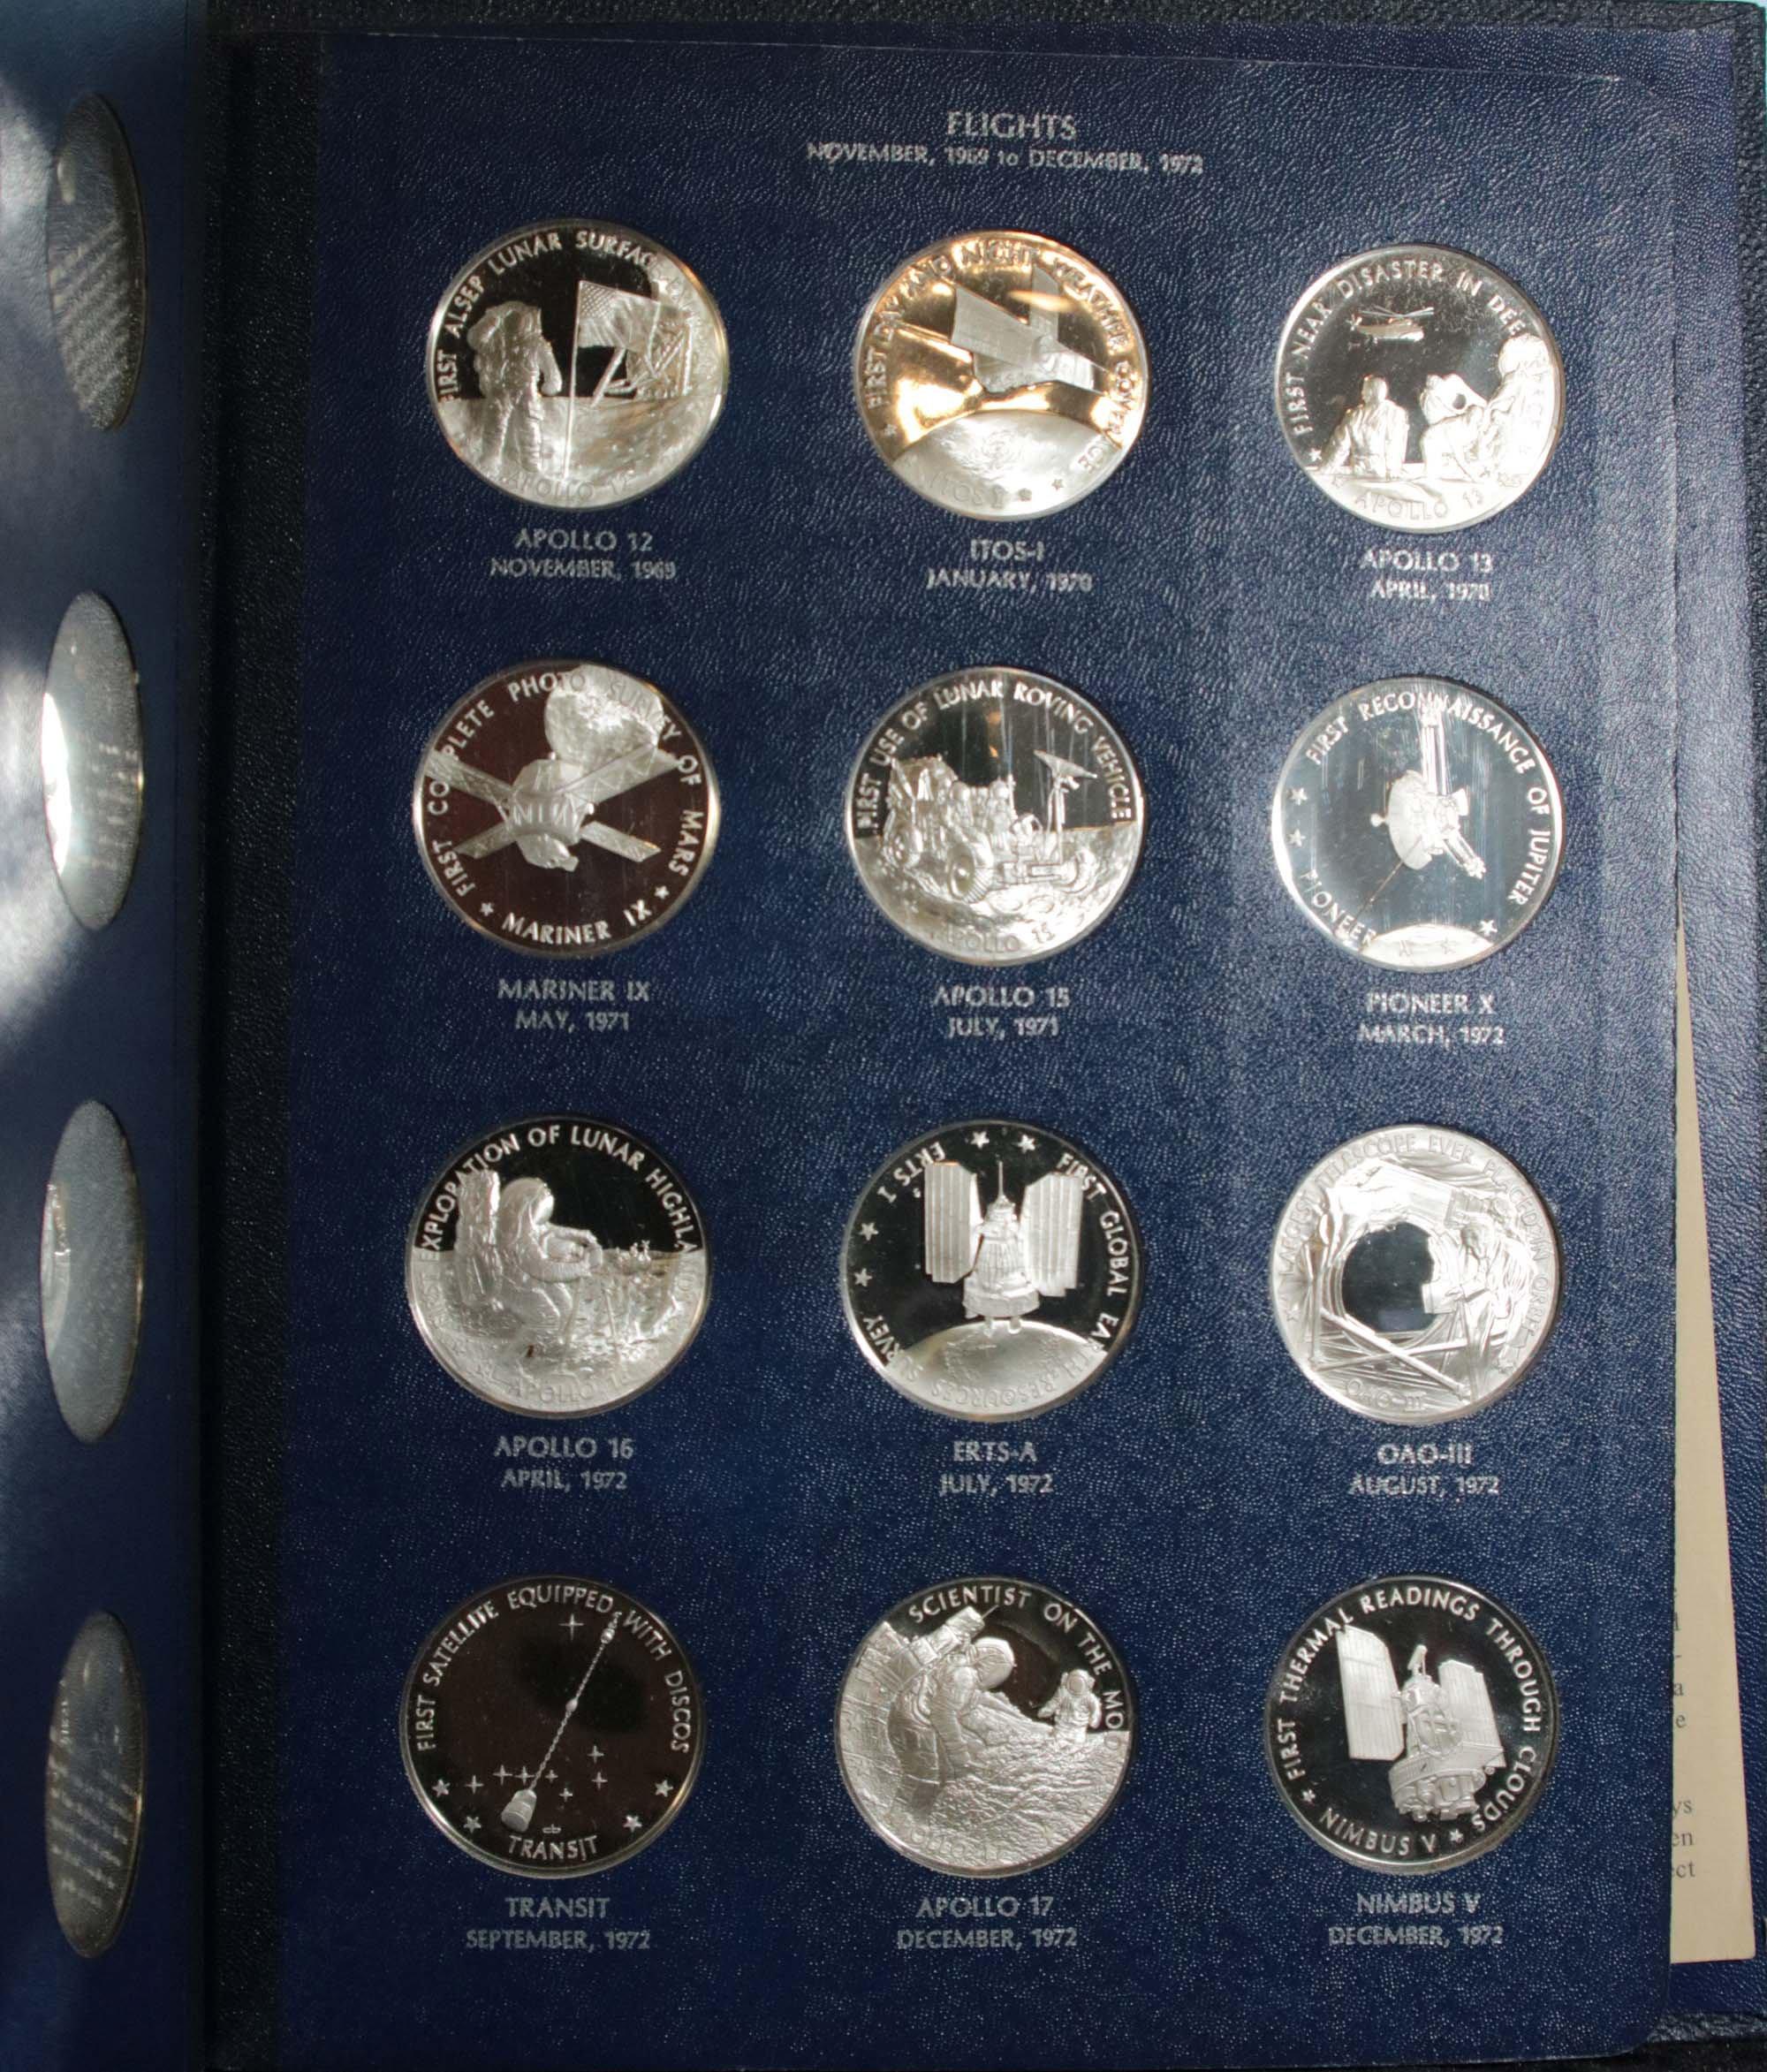 Franklin Mint America in Space 36 piece sterling silver set